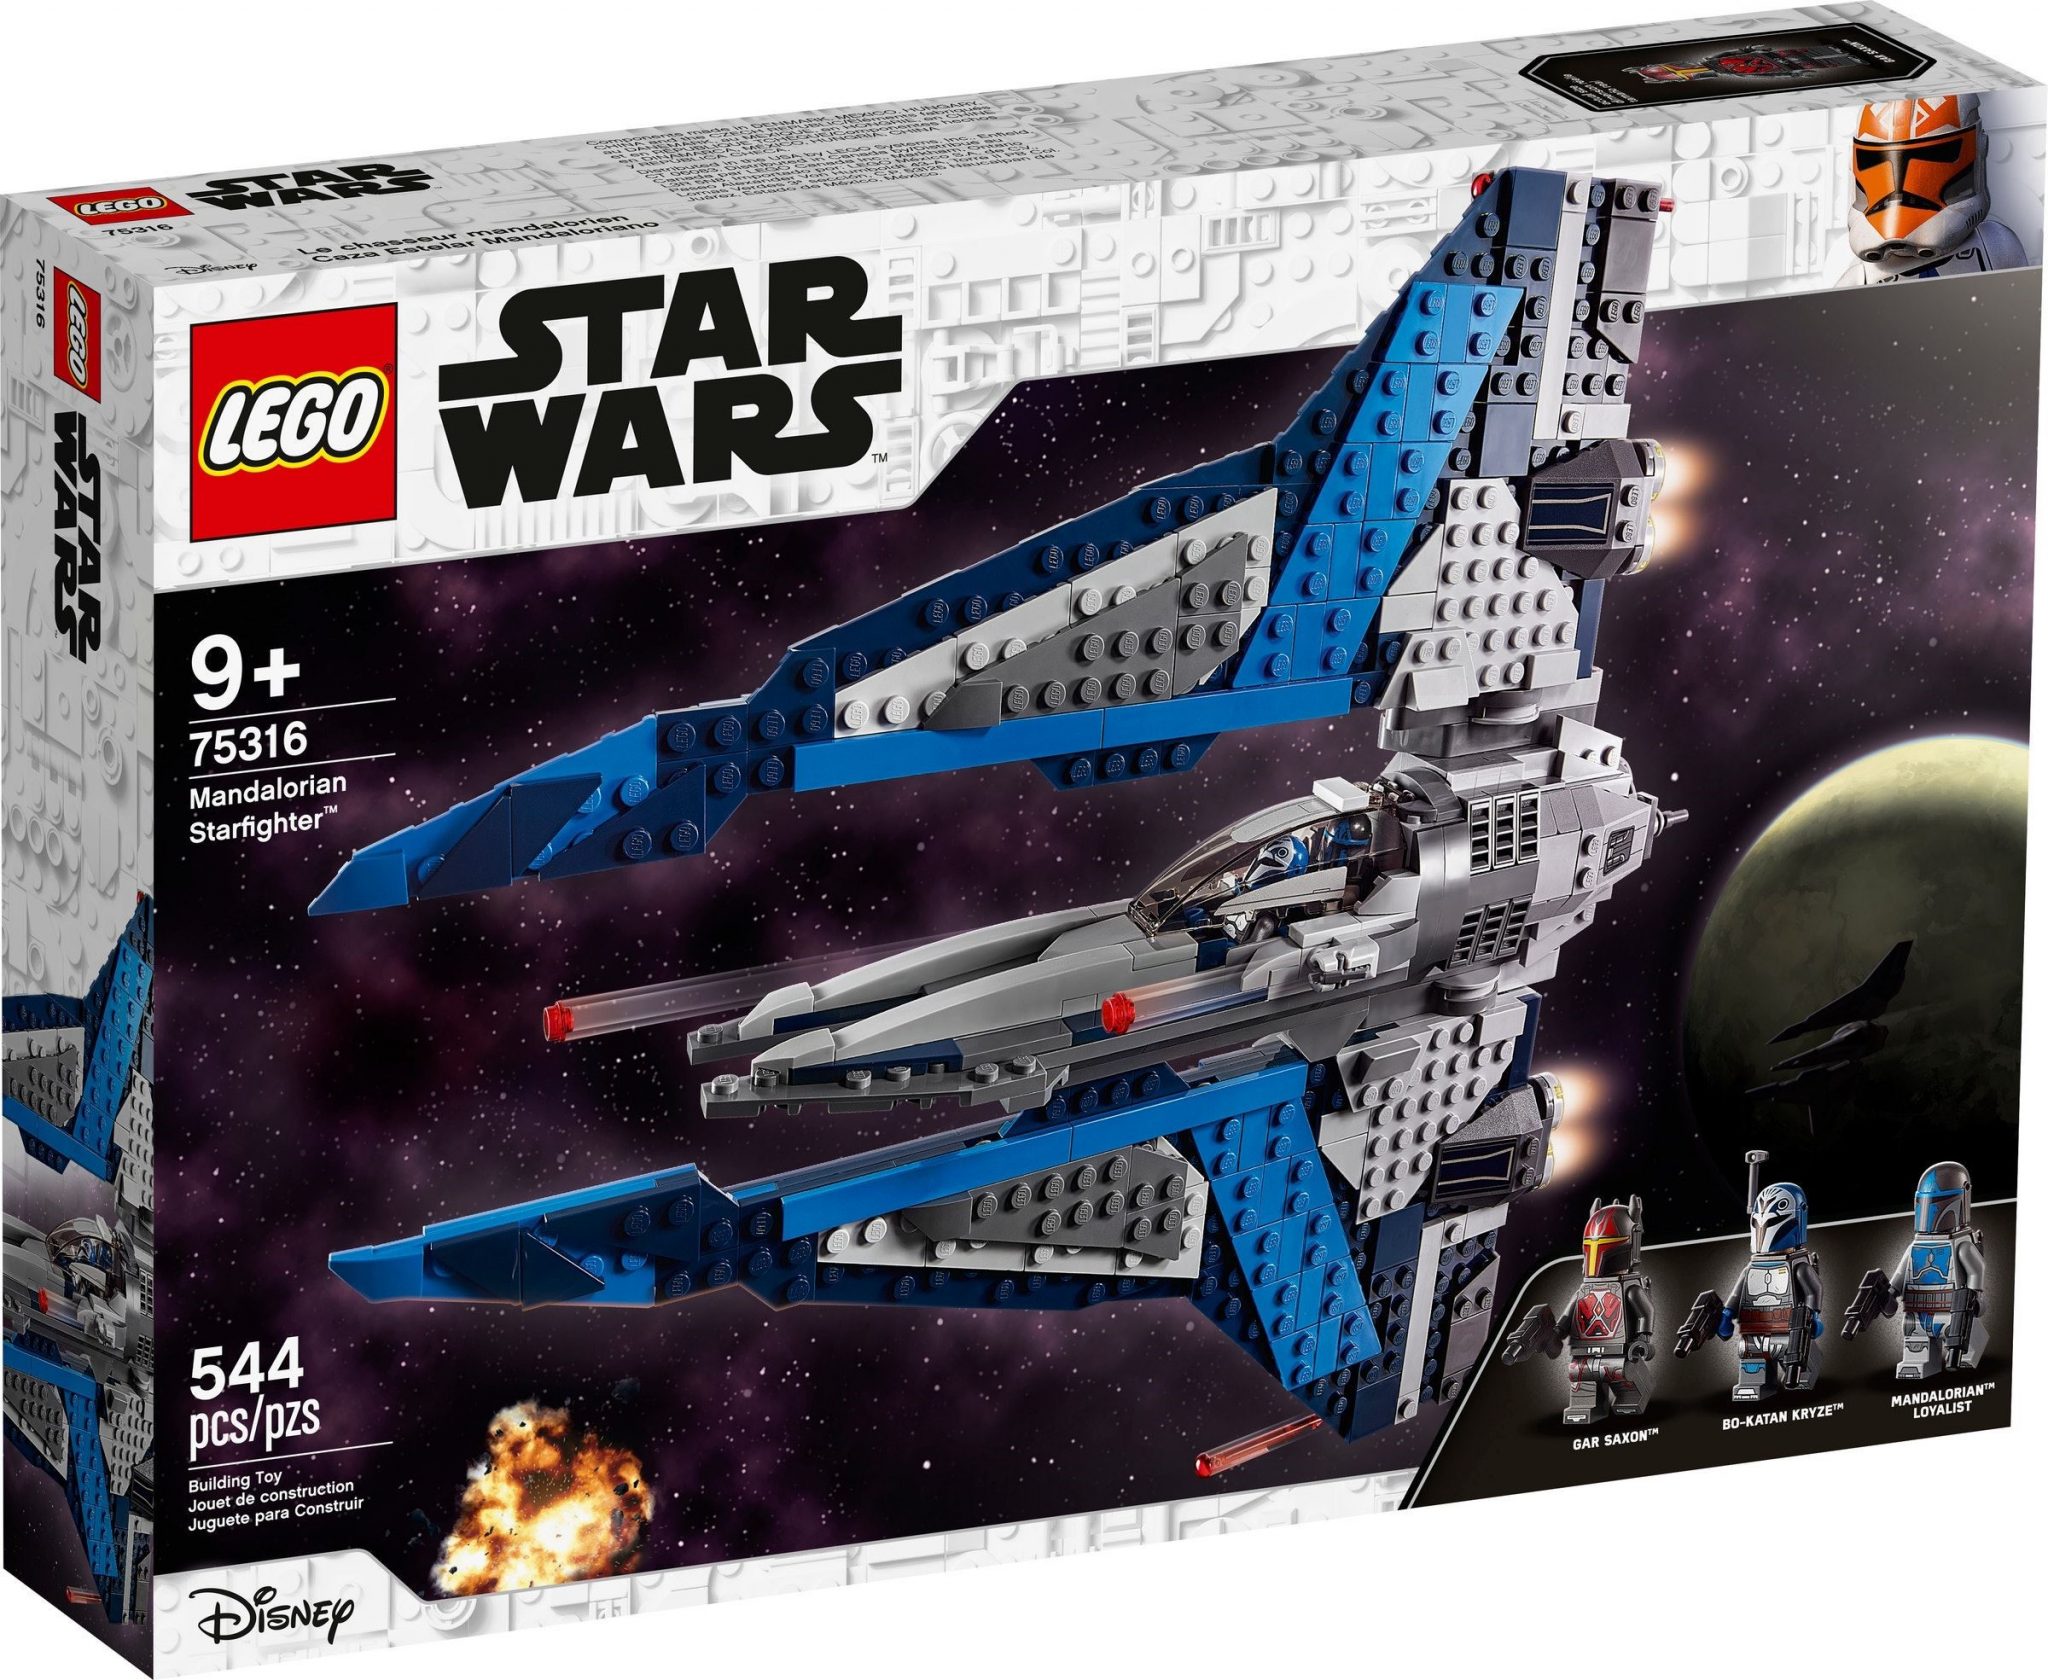 LEGO Star Wars Duel on Mandalore (75310) and Mandalorian Starfighter (75316) Official Images 